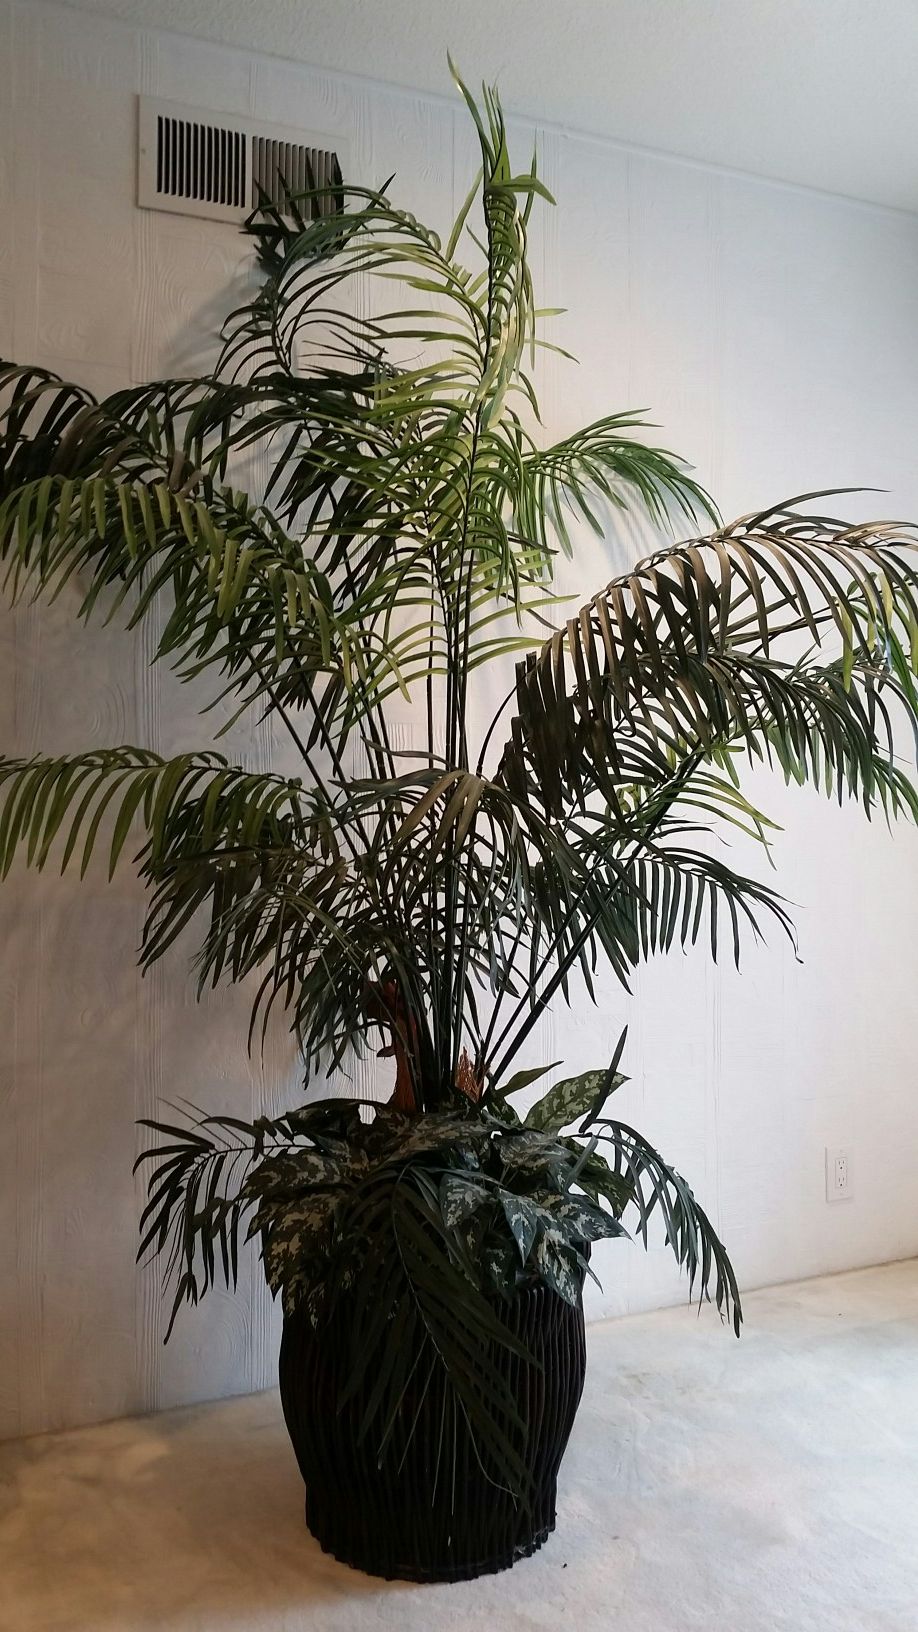 About 7' fake plant